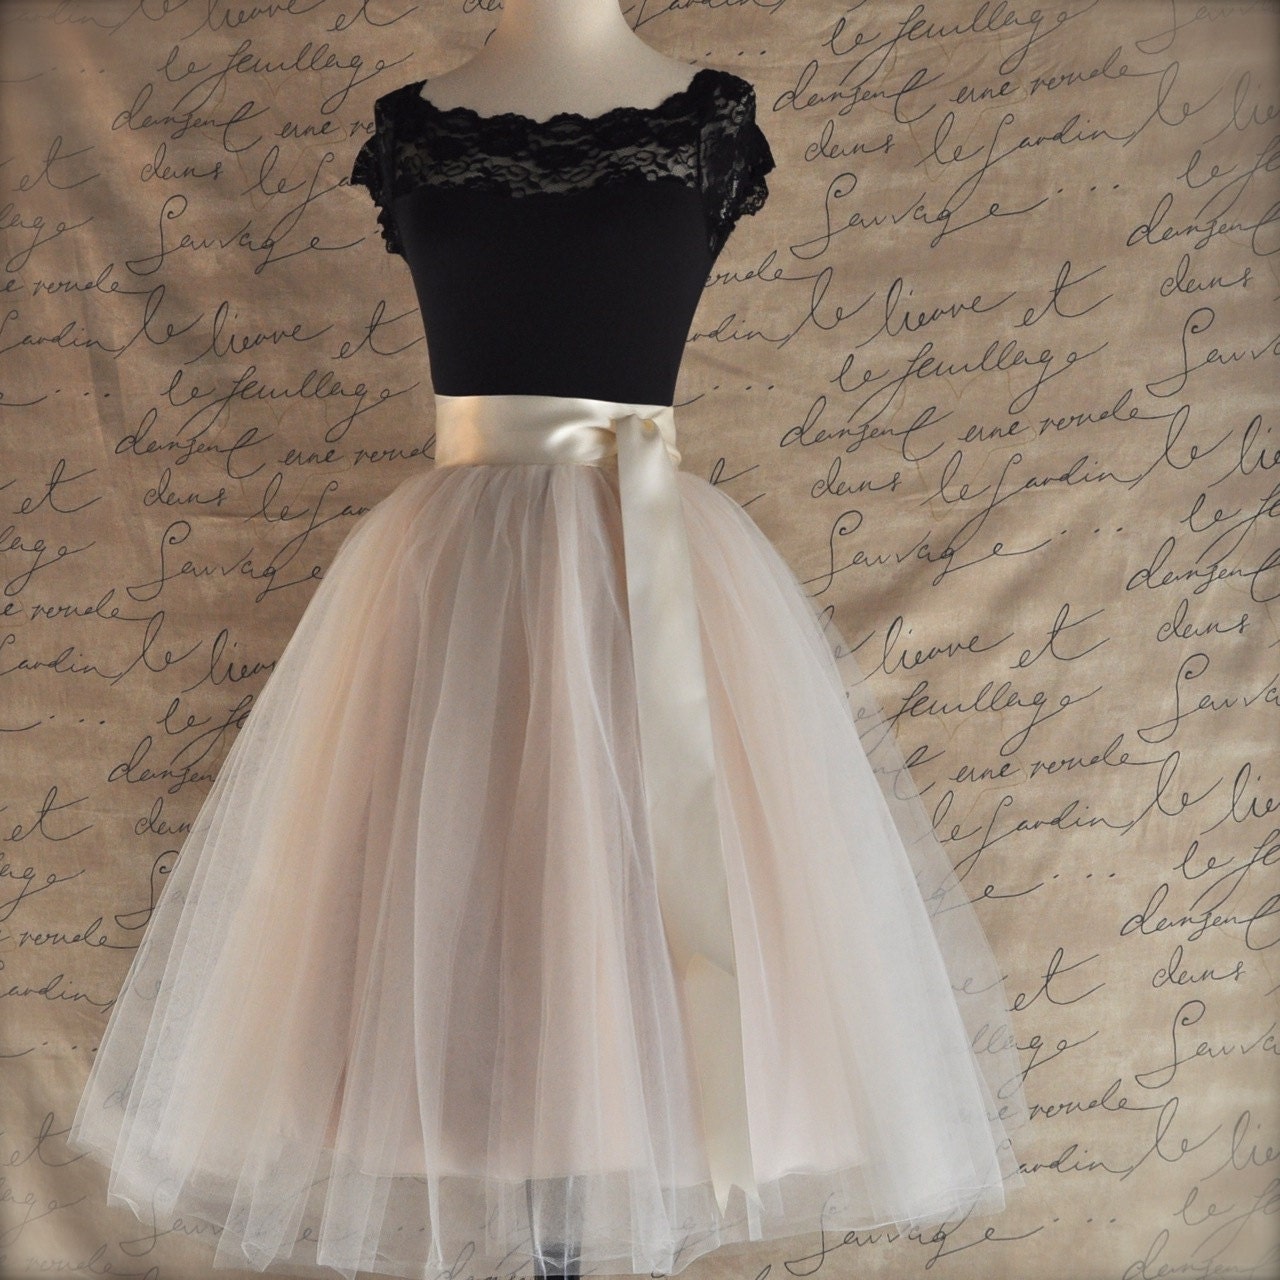 Palest champagne tulle skirt. Fluffy tulle layers with circle